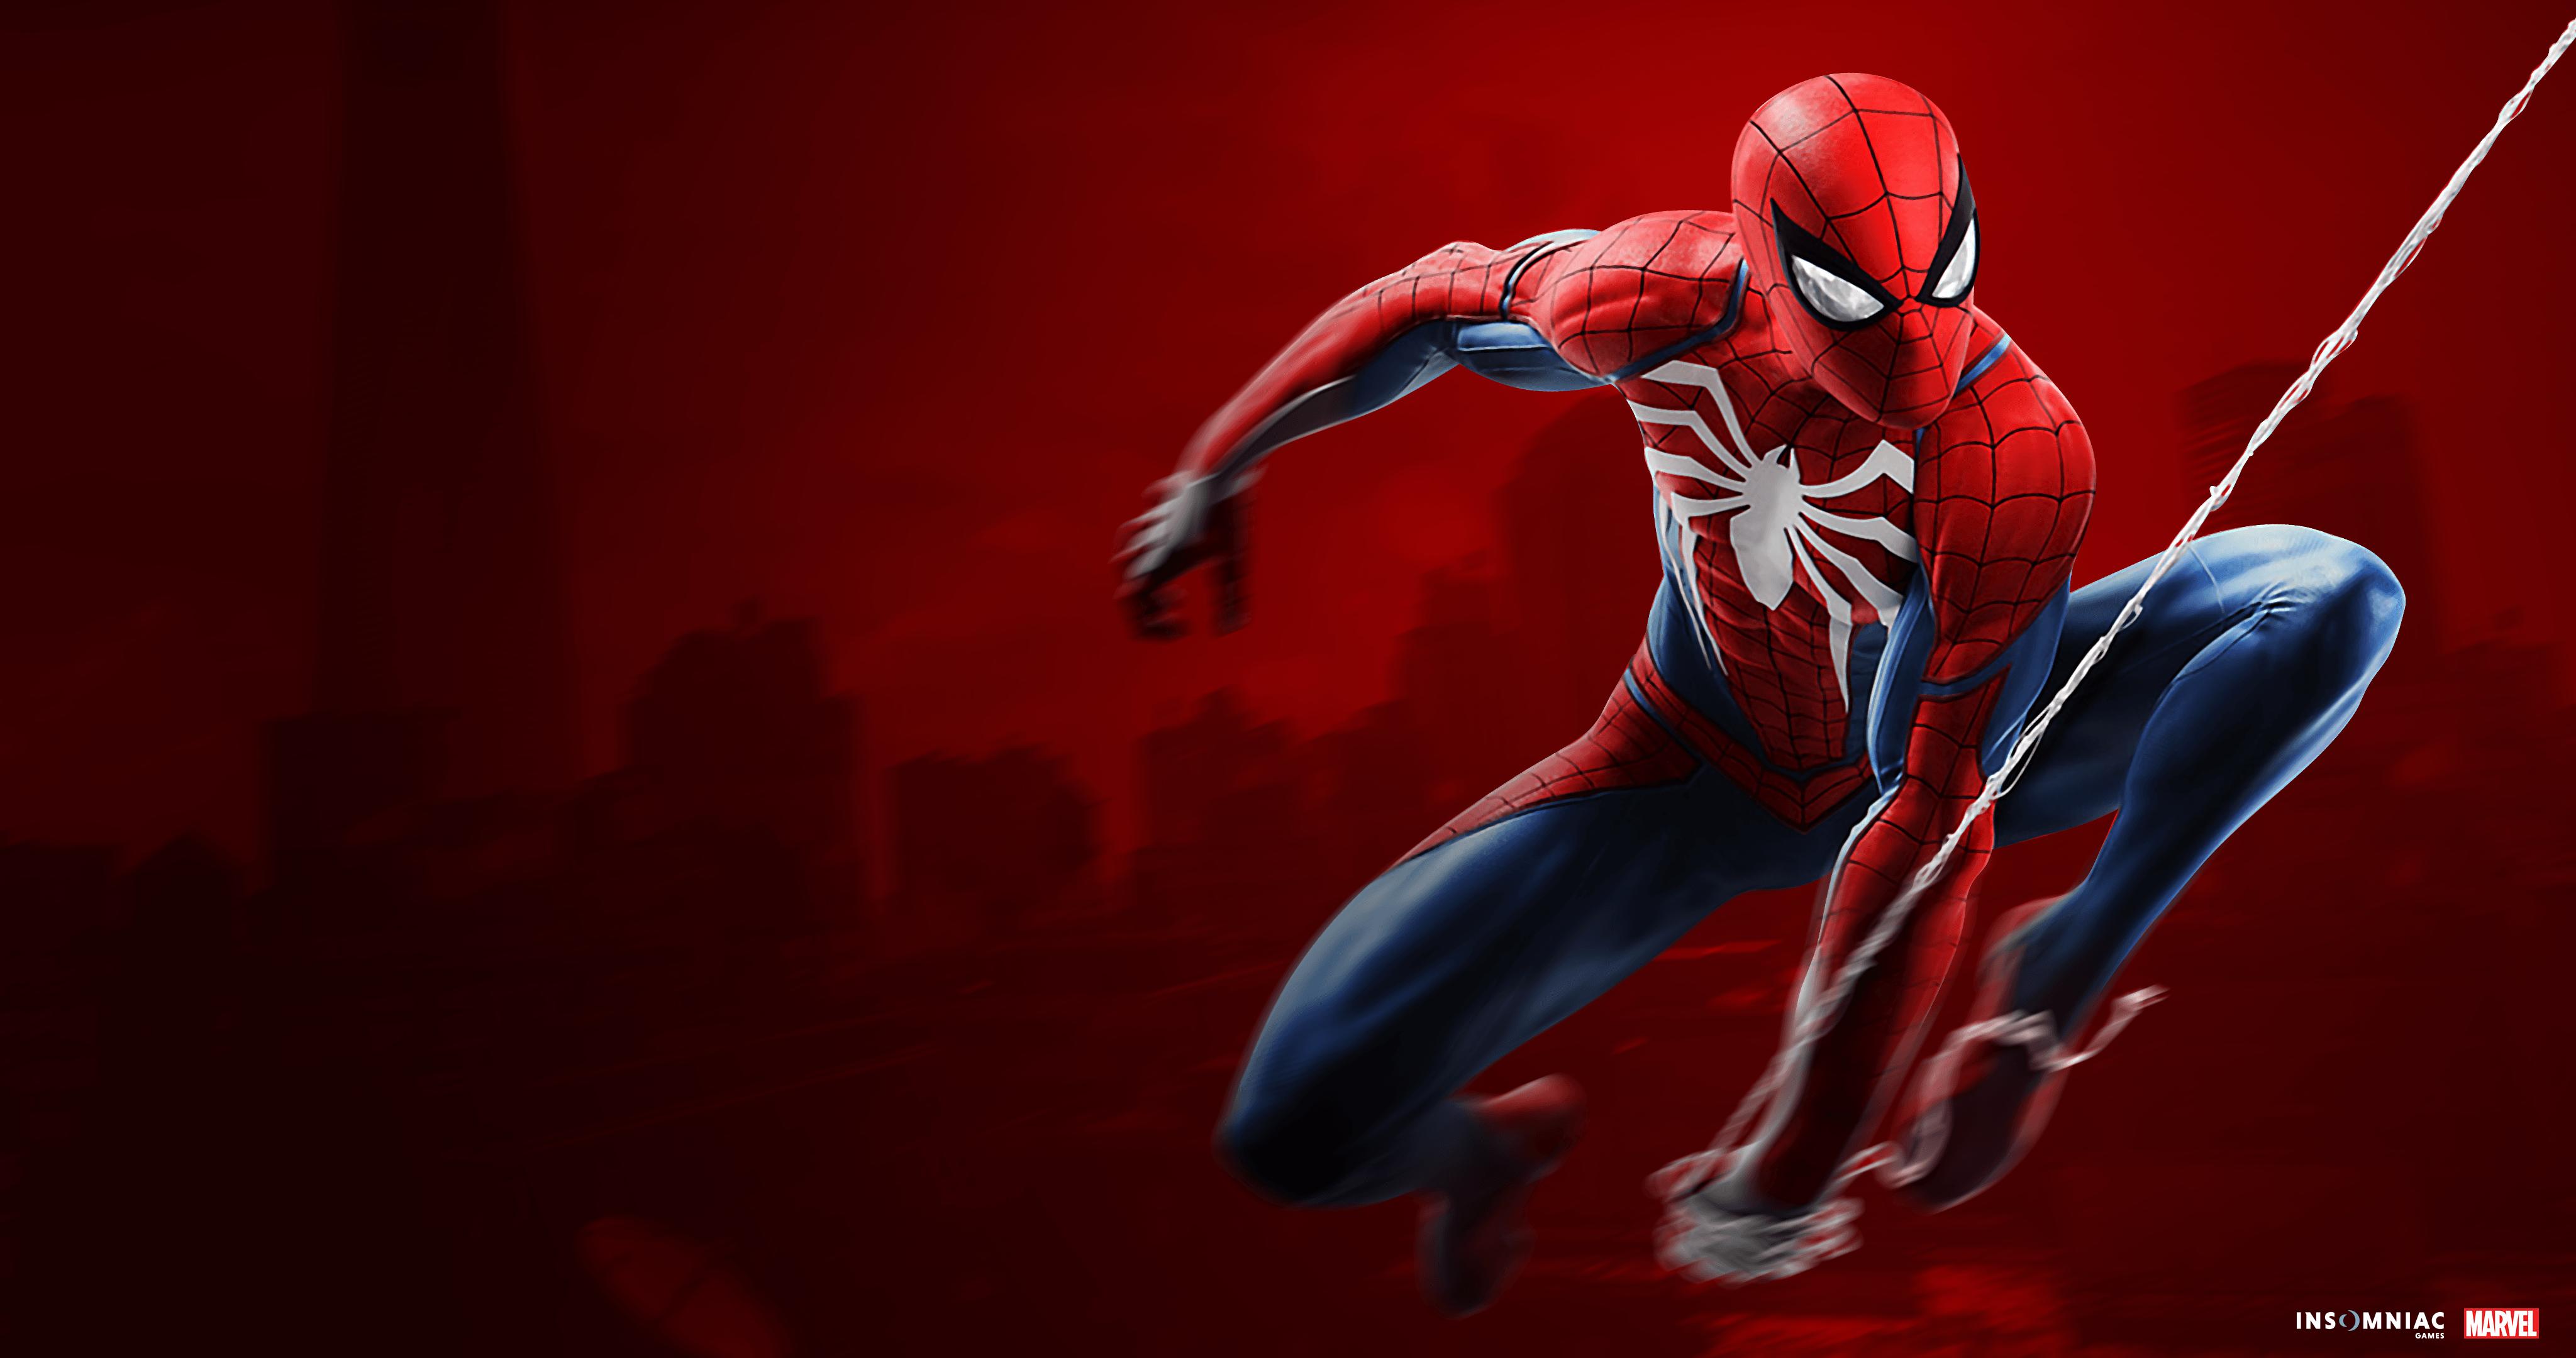 4096 x 2160 · png - Spider-Man 4K Wallpapers - Wallpaper Cave